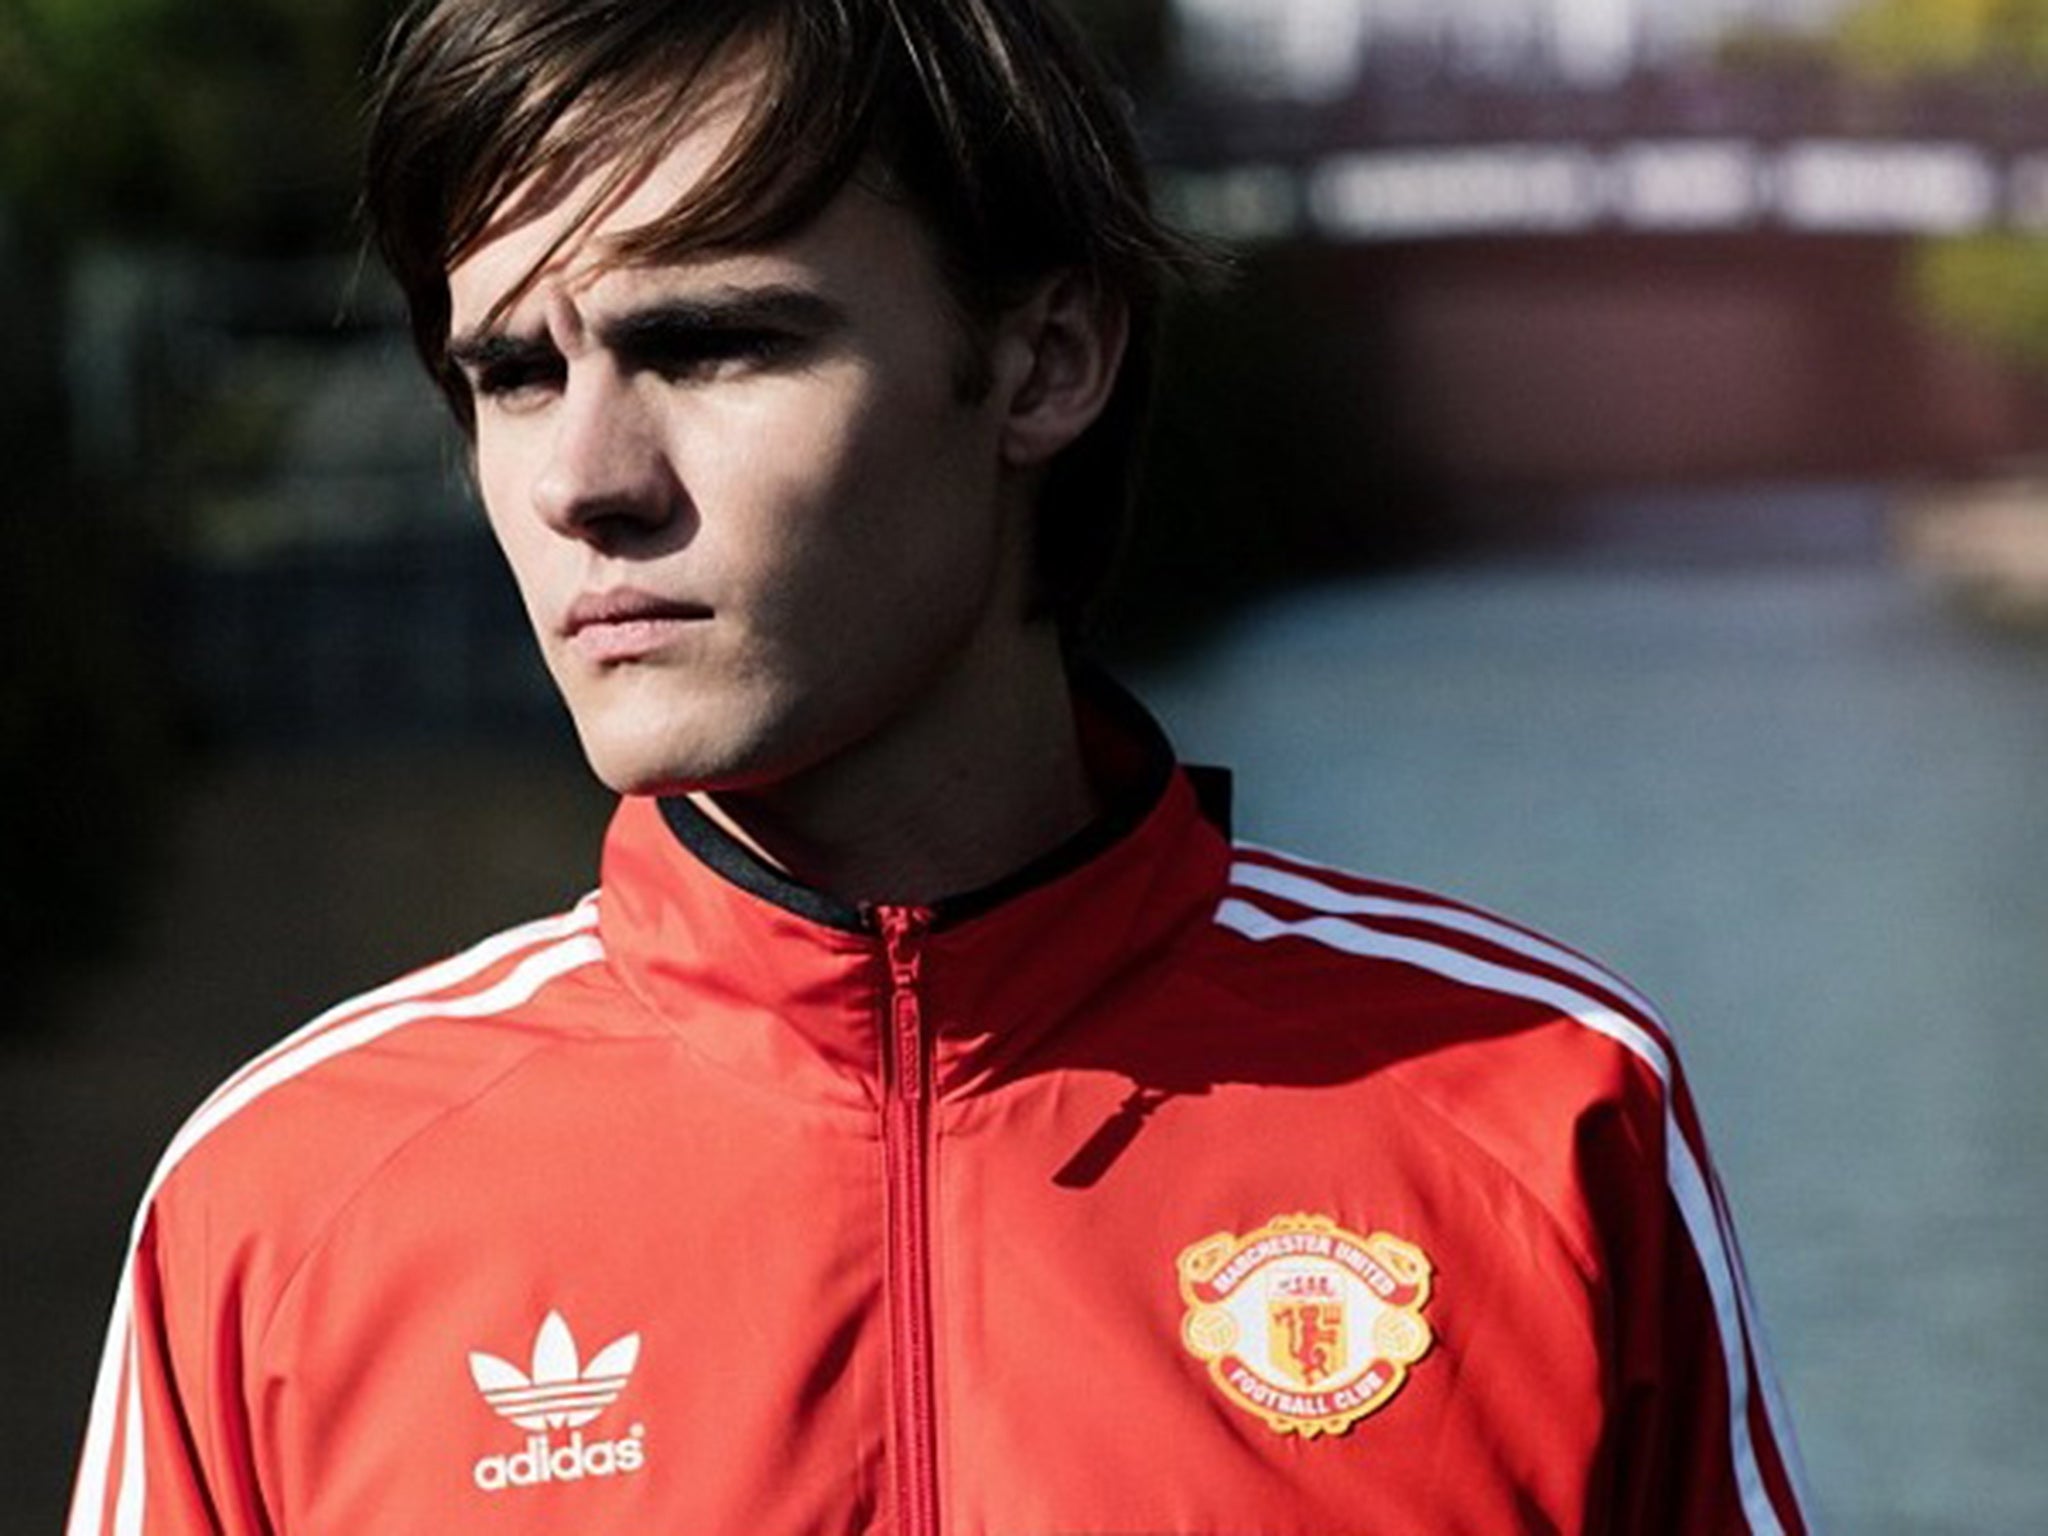 Manchester United kit: Adidas Originals launch retro United shirt inspired  by 1985 FA Cup triumph, The Independent